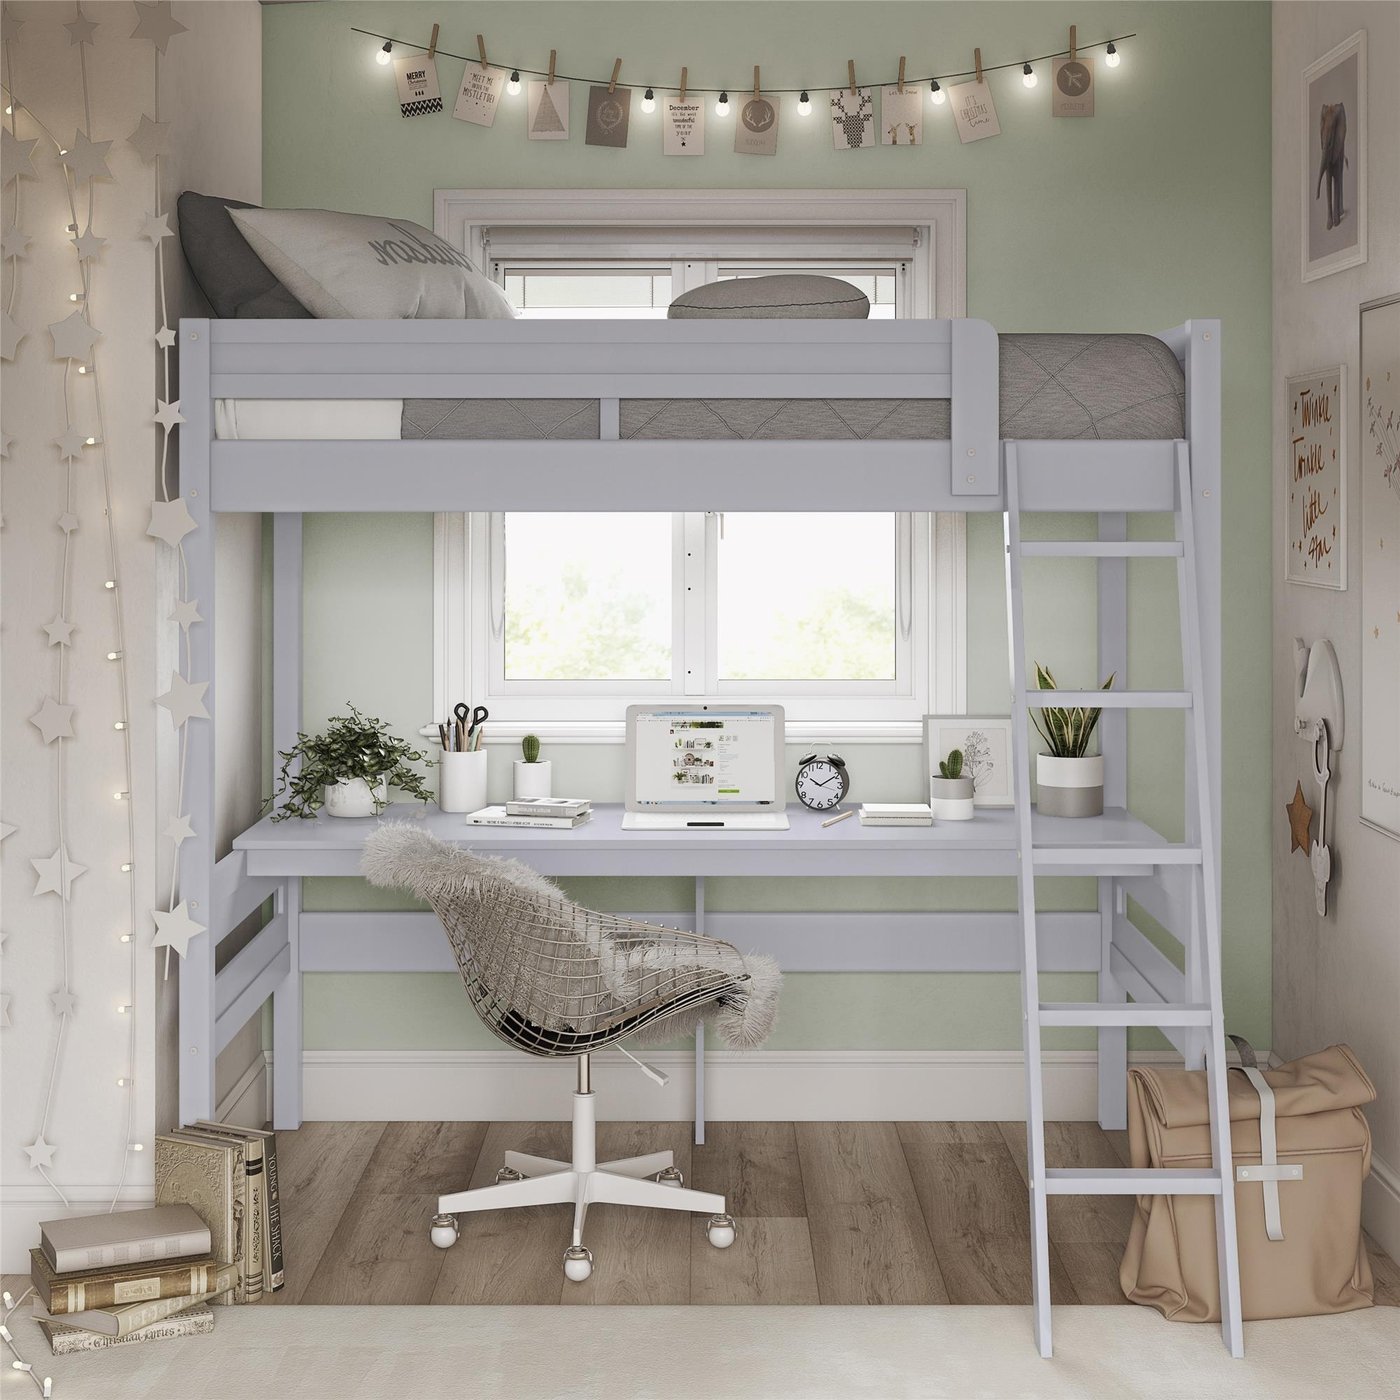 6 Reasons To Get A Loft Bed For A Small Space Visualhunt